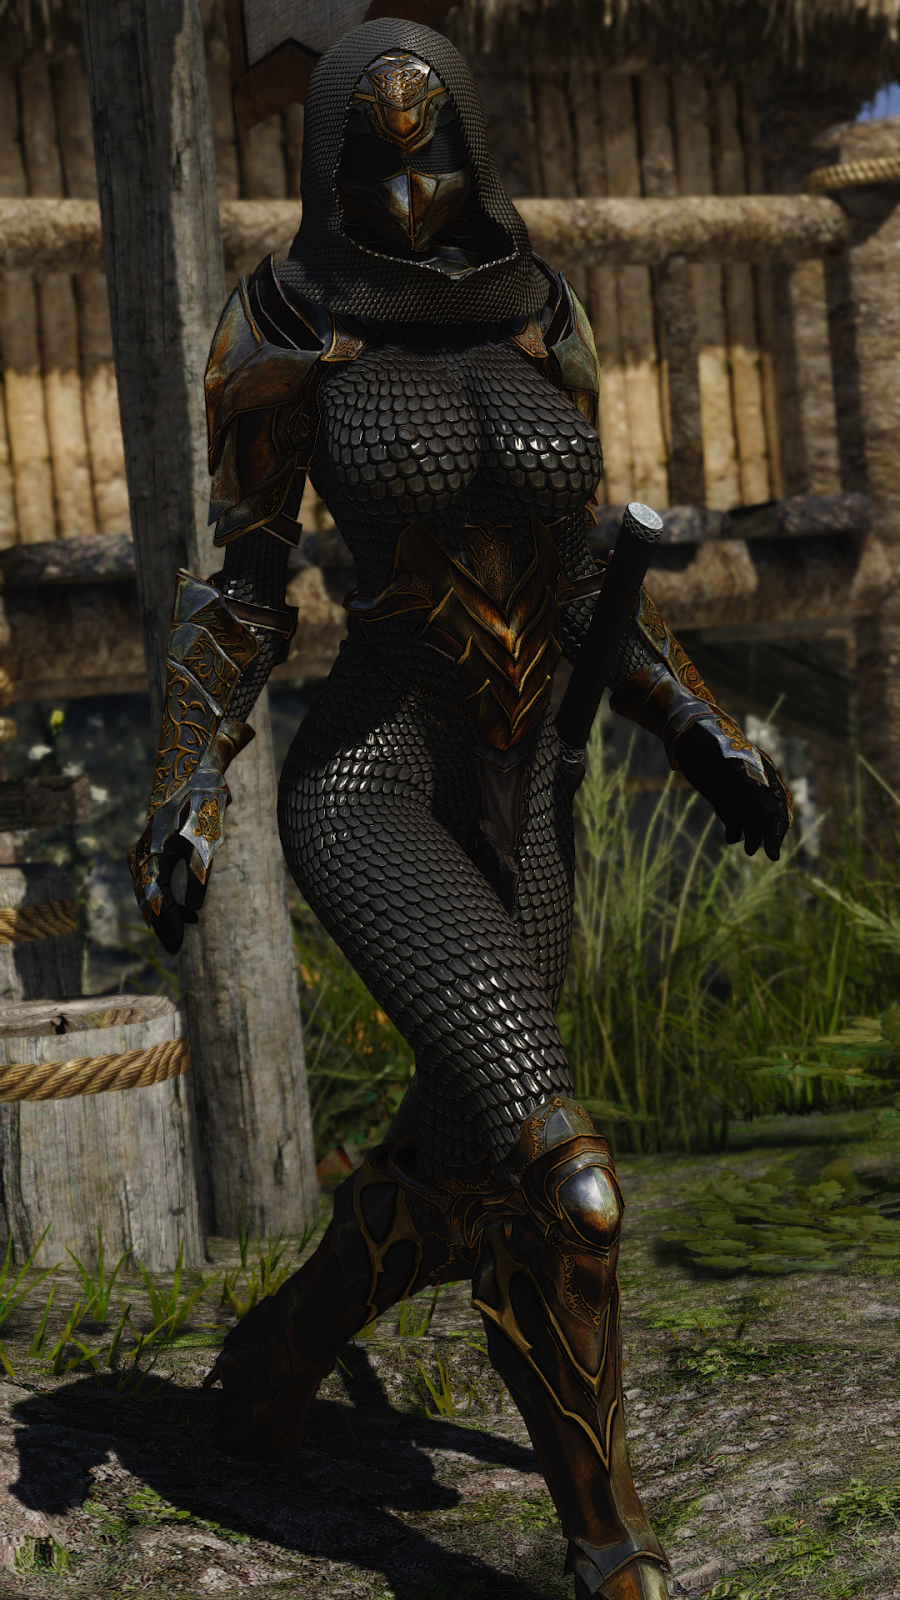 [search] Looking This Armor Request And Find Skyrim Non Adult Mods Loverslab